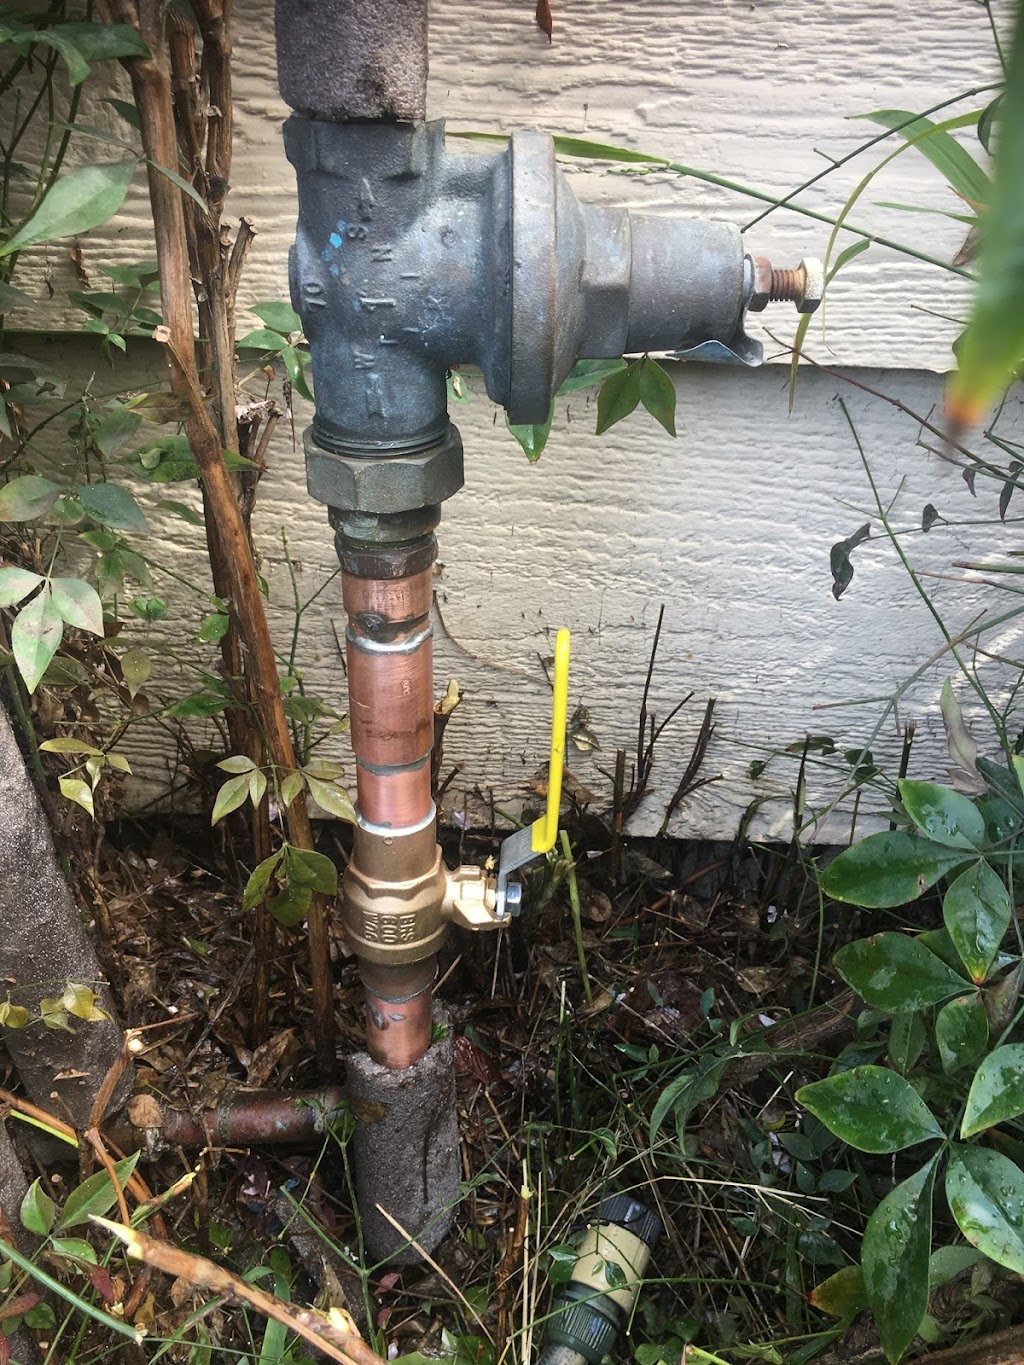 Plumbing Connection Inc | 4154 Asimuth Cir, Union City, CA 94587 | Phone: (510) 688-4300